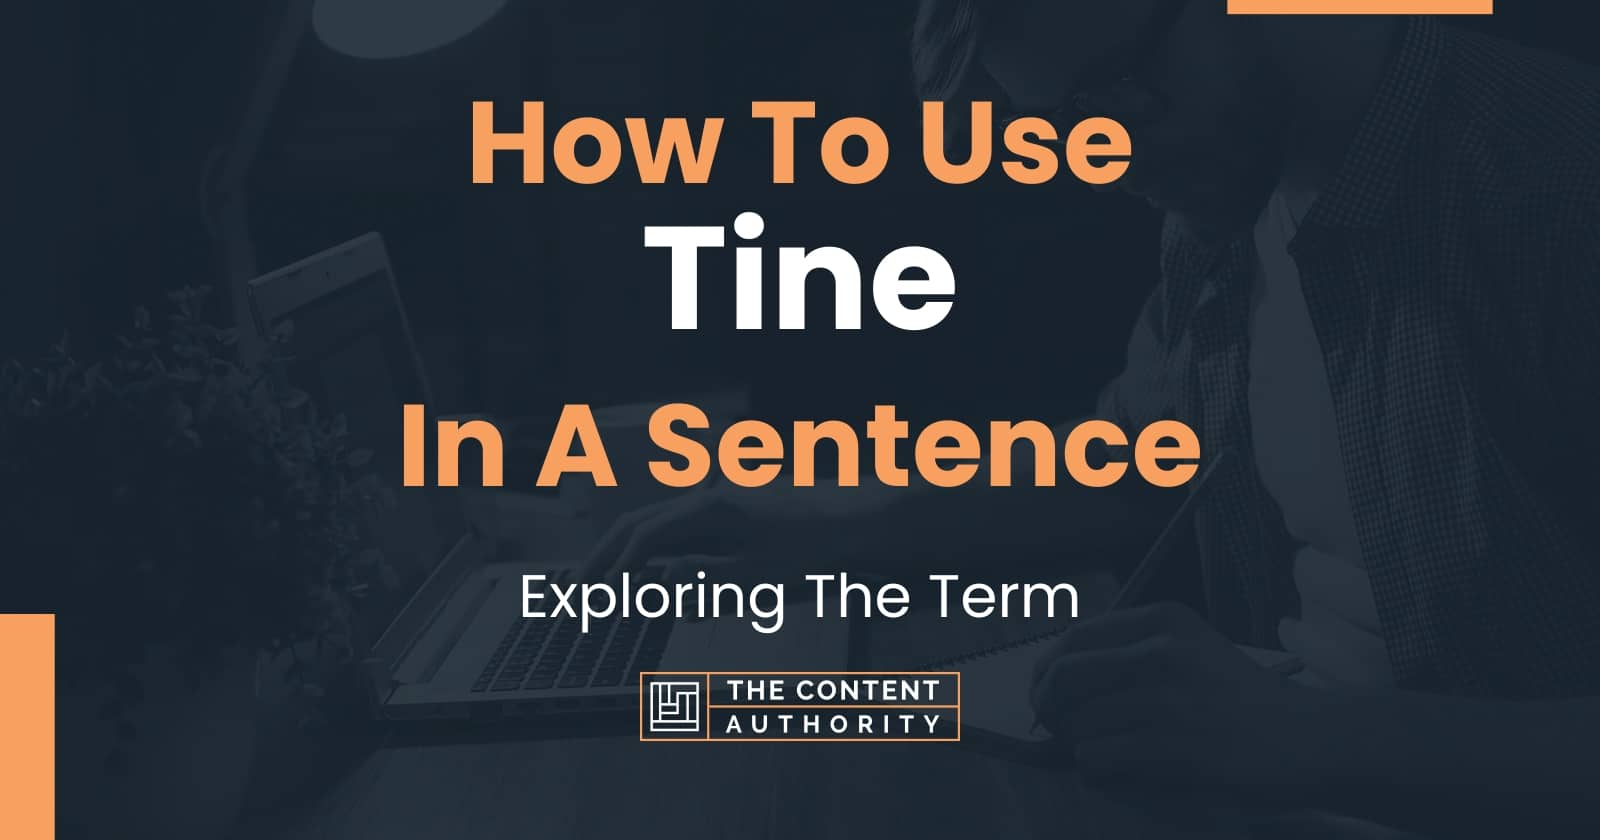 How To Use Tine In A Sentence 